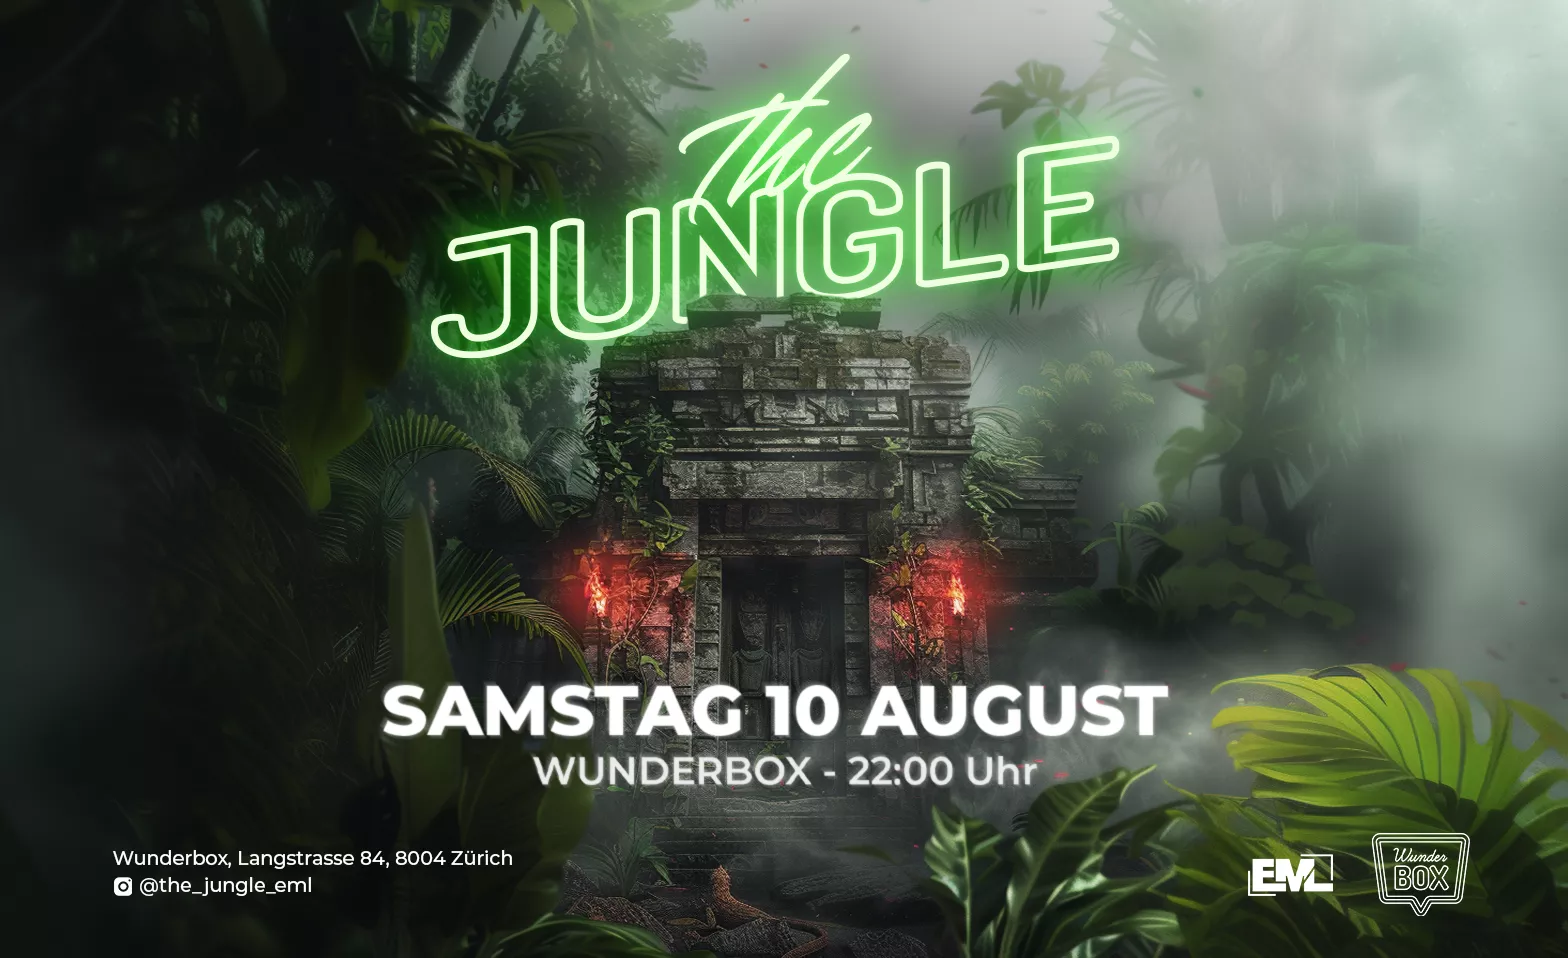 Event-Image for 'THE JUNGLE PARADE'